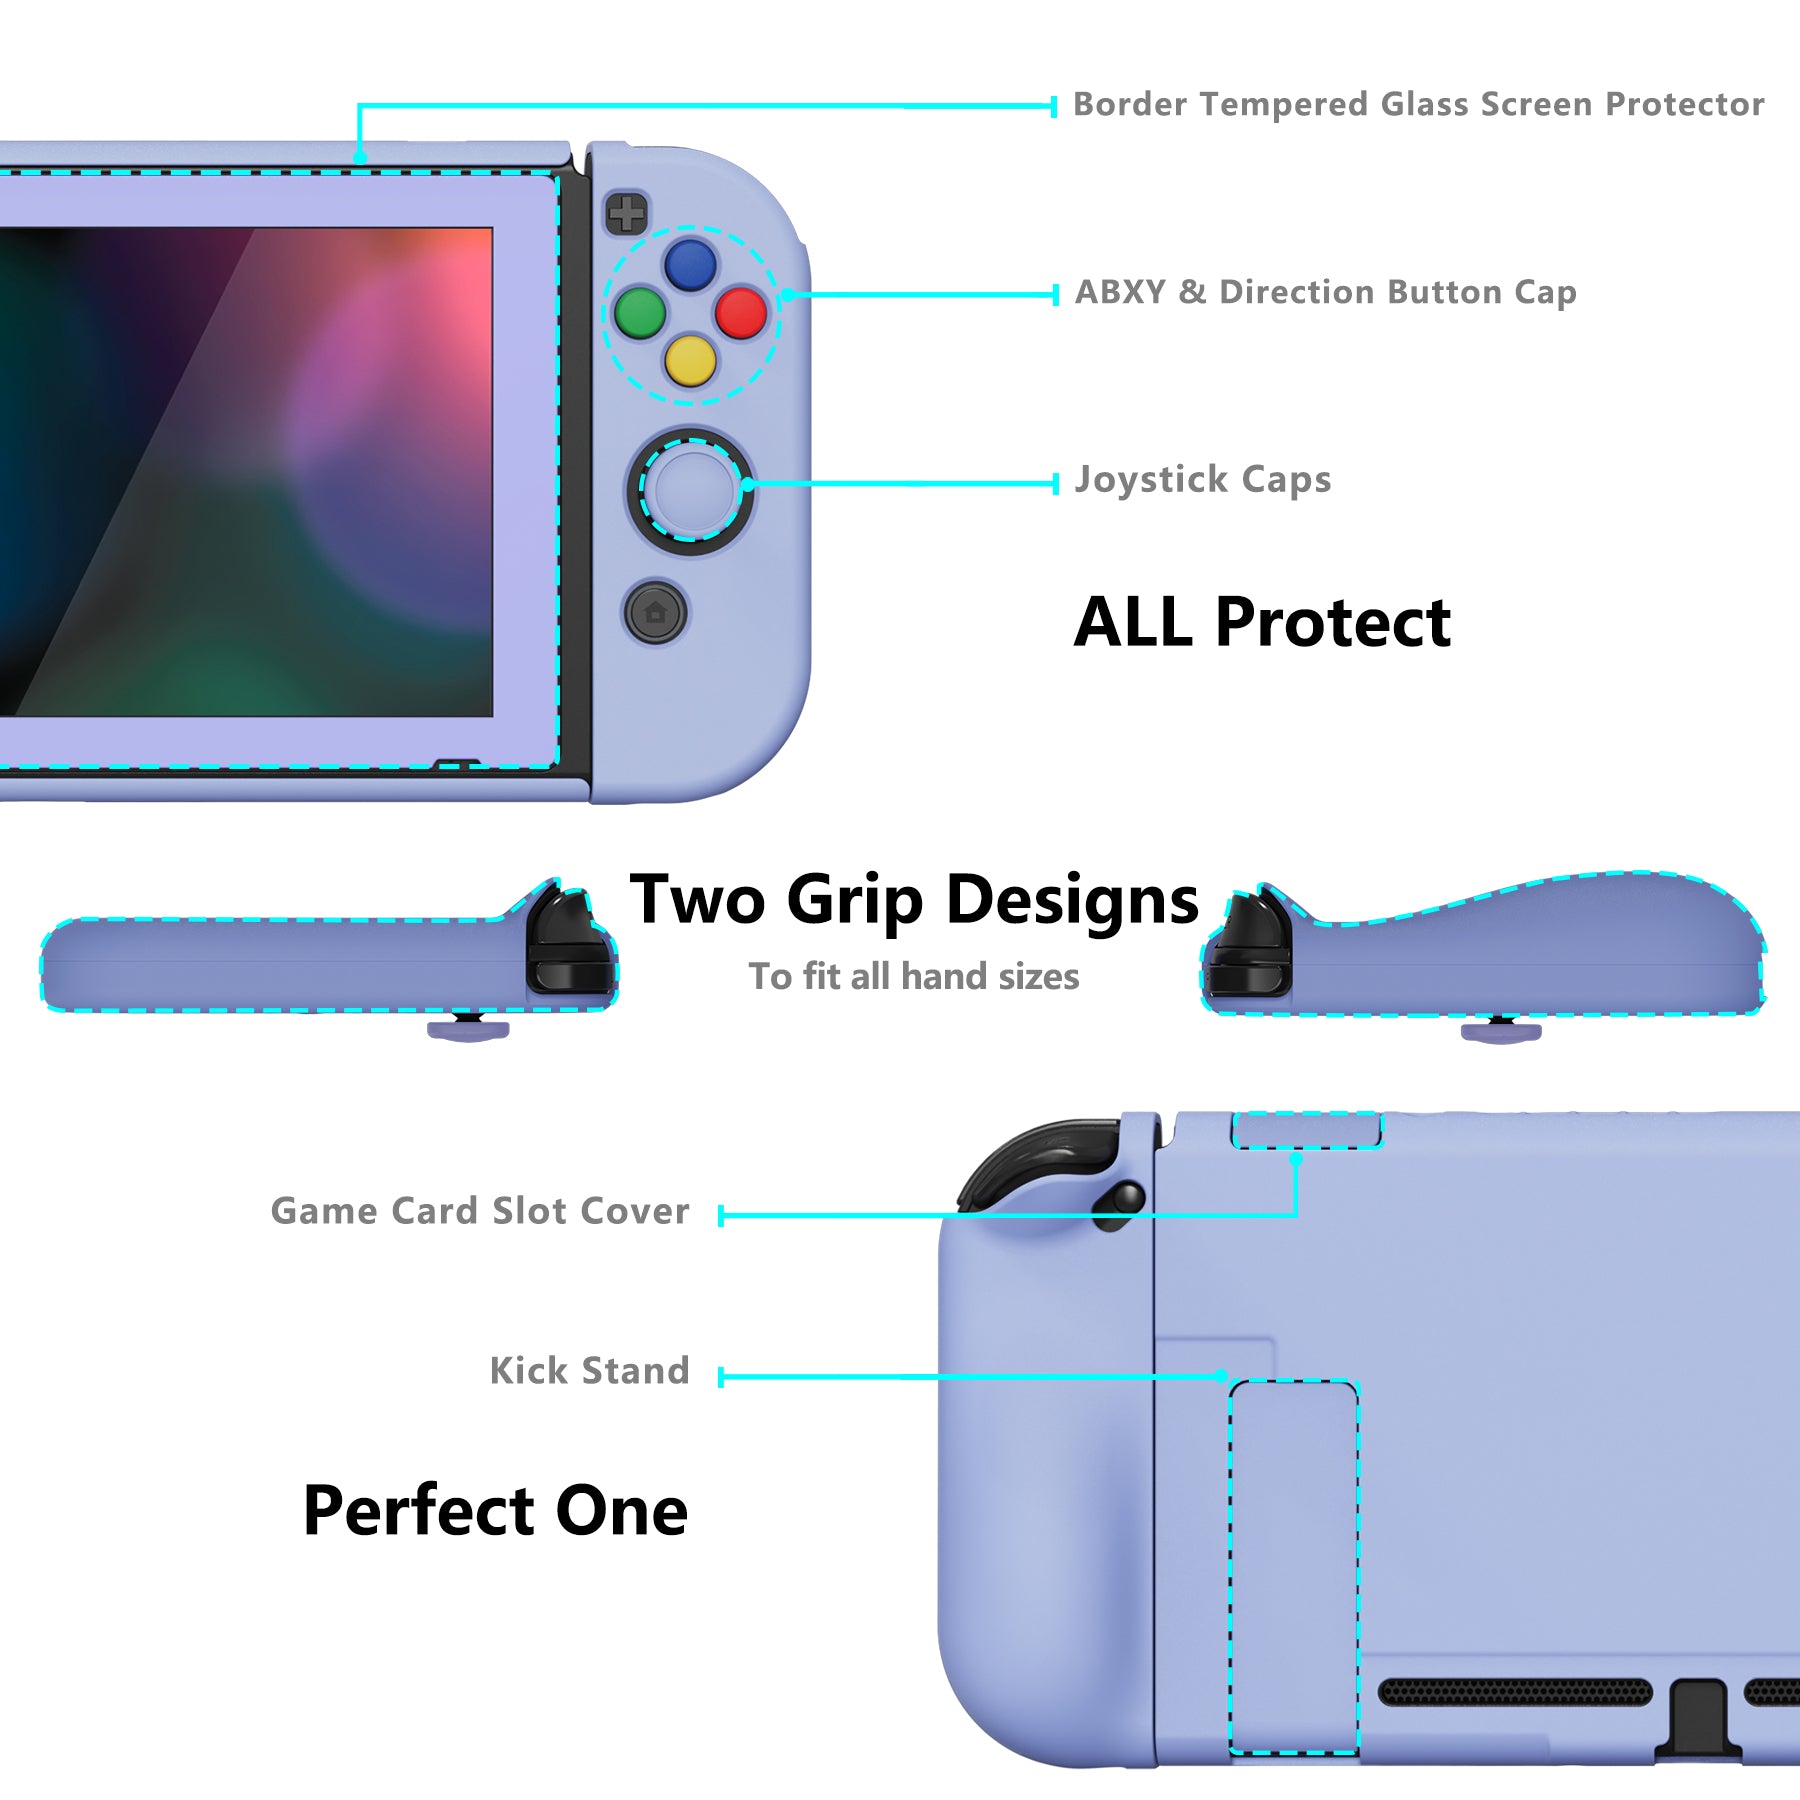 PlayVital AlterGrips Dockable Protective Case Ergonomic Grip Cover for Nintendo Switch, Interchangeable Cover w/Screen Protector & Thumb Grip Caps & Button Caps - Light Violet - TNSYP3008